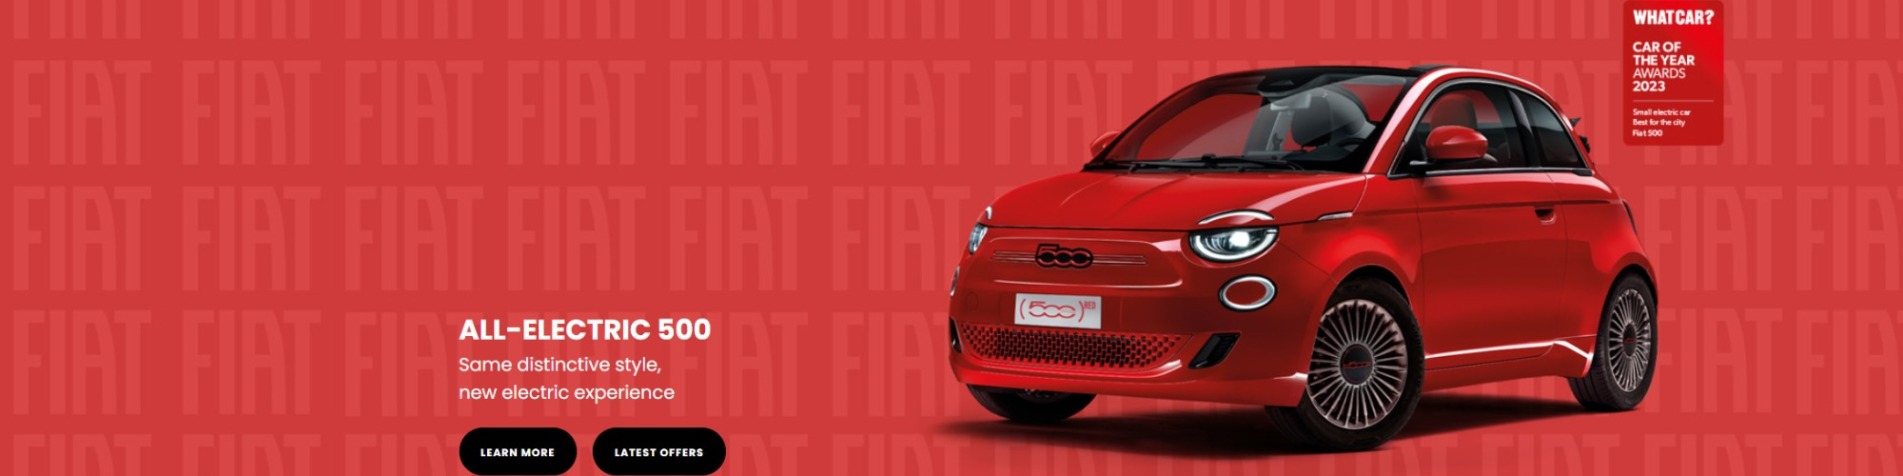 All-Electric Fiat 500 RED Banner